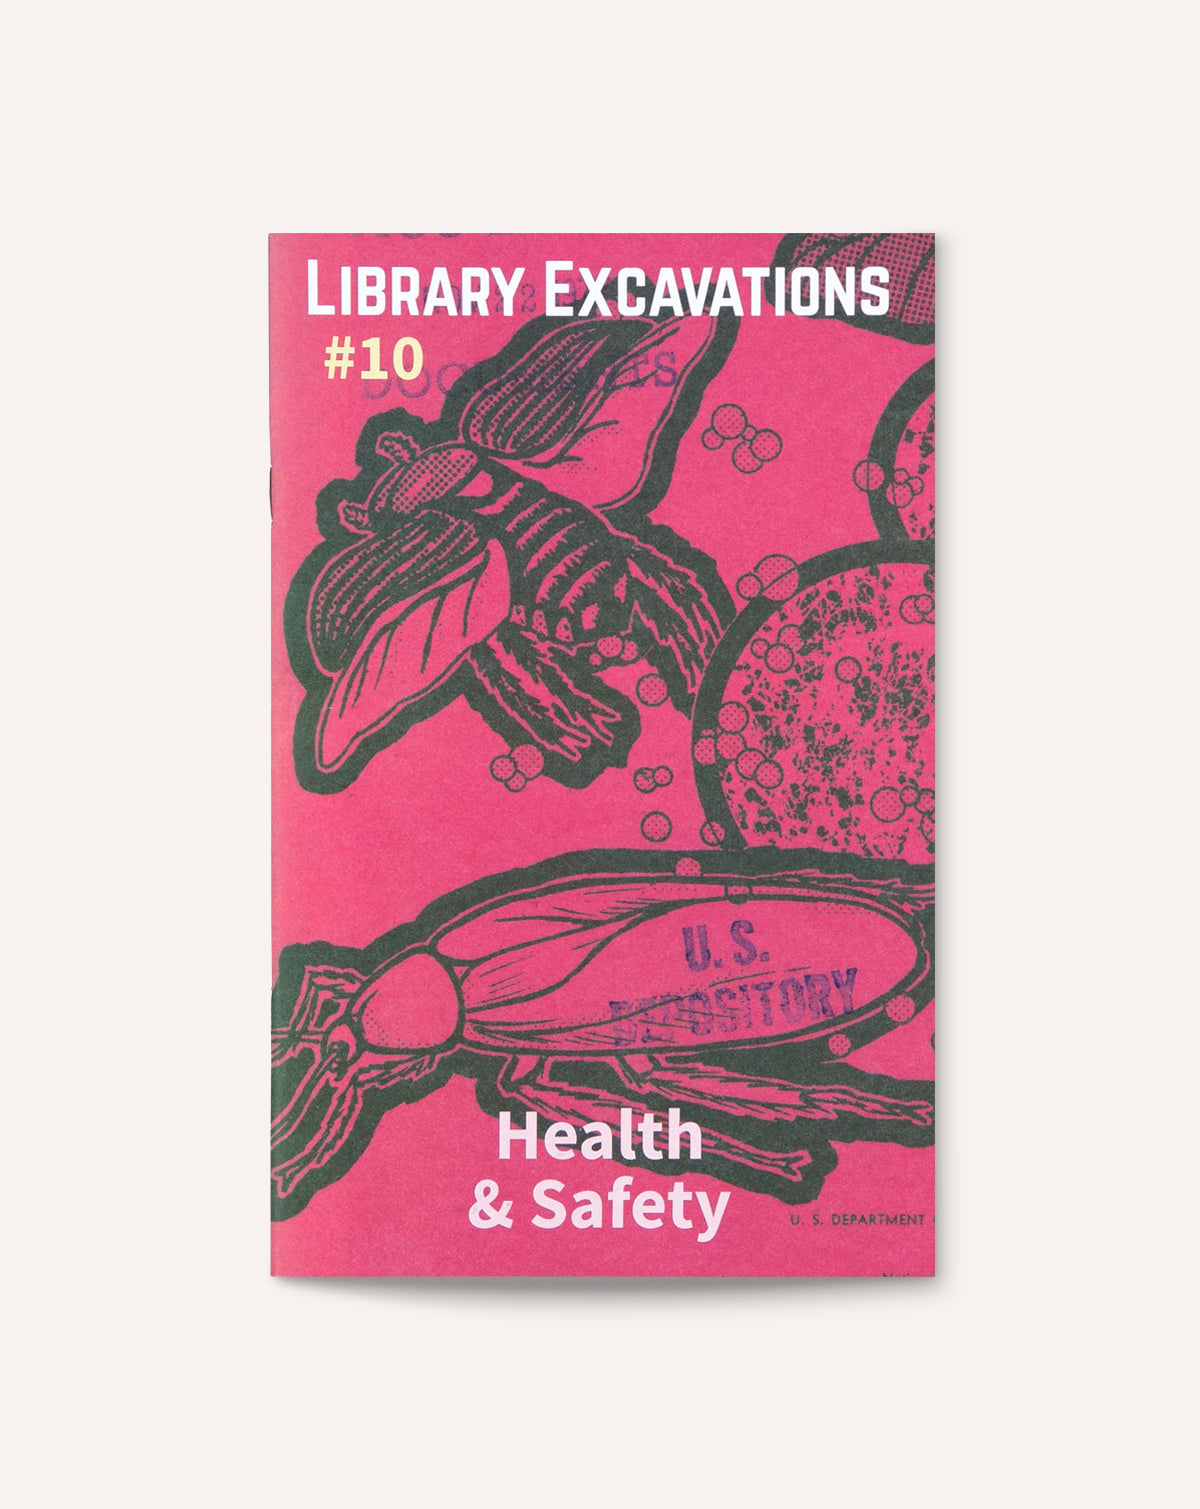 Library Excavations #10: Health & Safety